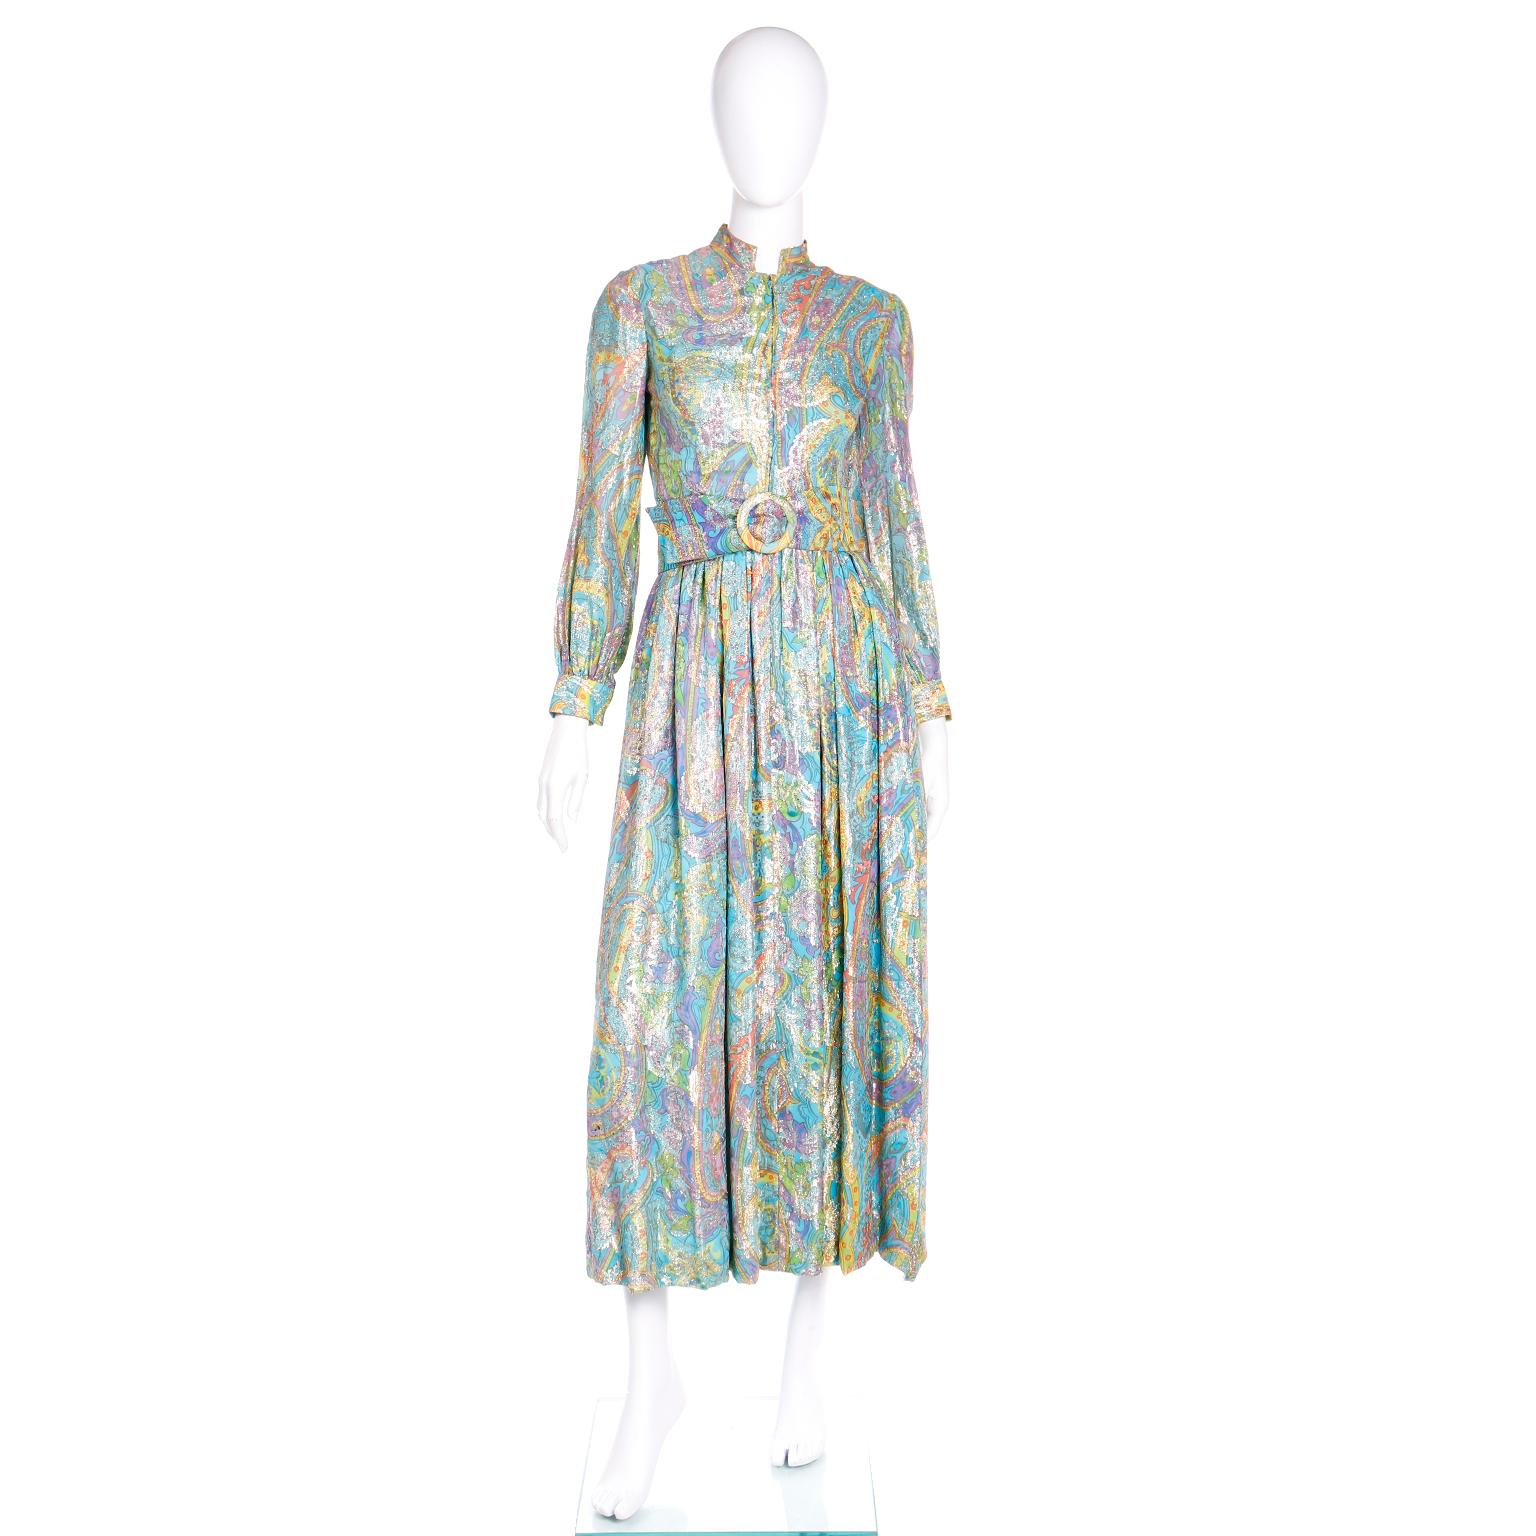 This fun vintage Larry Aldrich maxi dress is from the late 1960's or early 1970's and it is in a gorgeous paisley print in shades of blue, yellow, green, orange, and purple with gold metallic woven in the print. We love dresses like these because